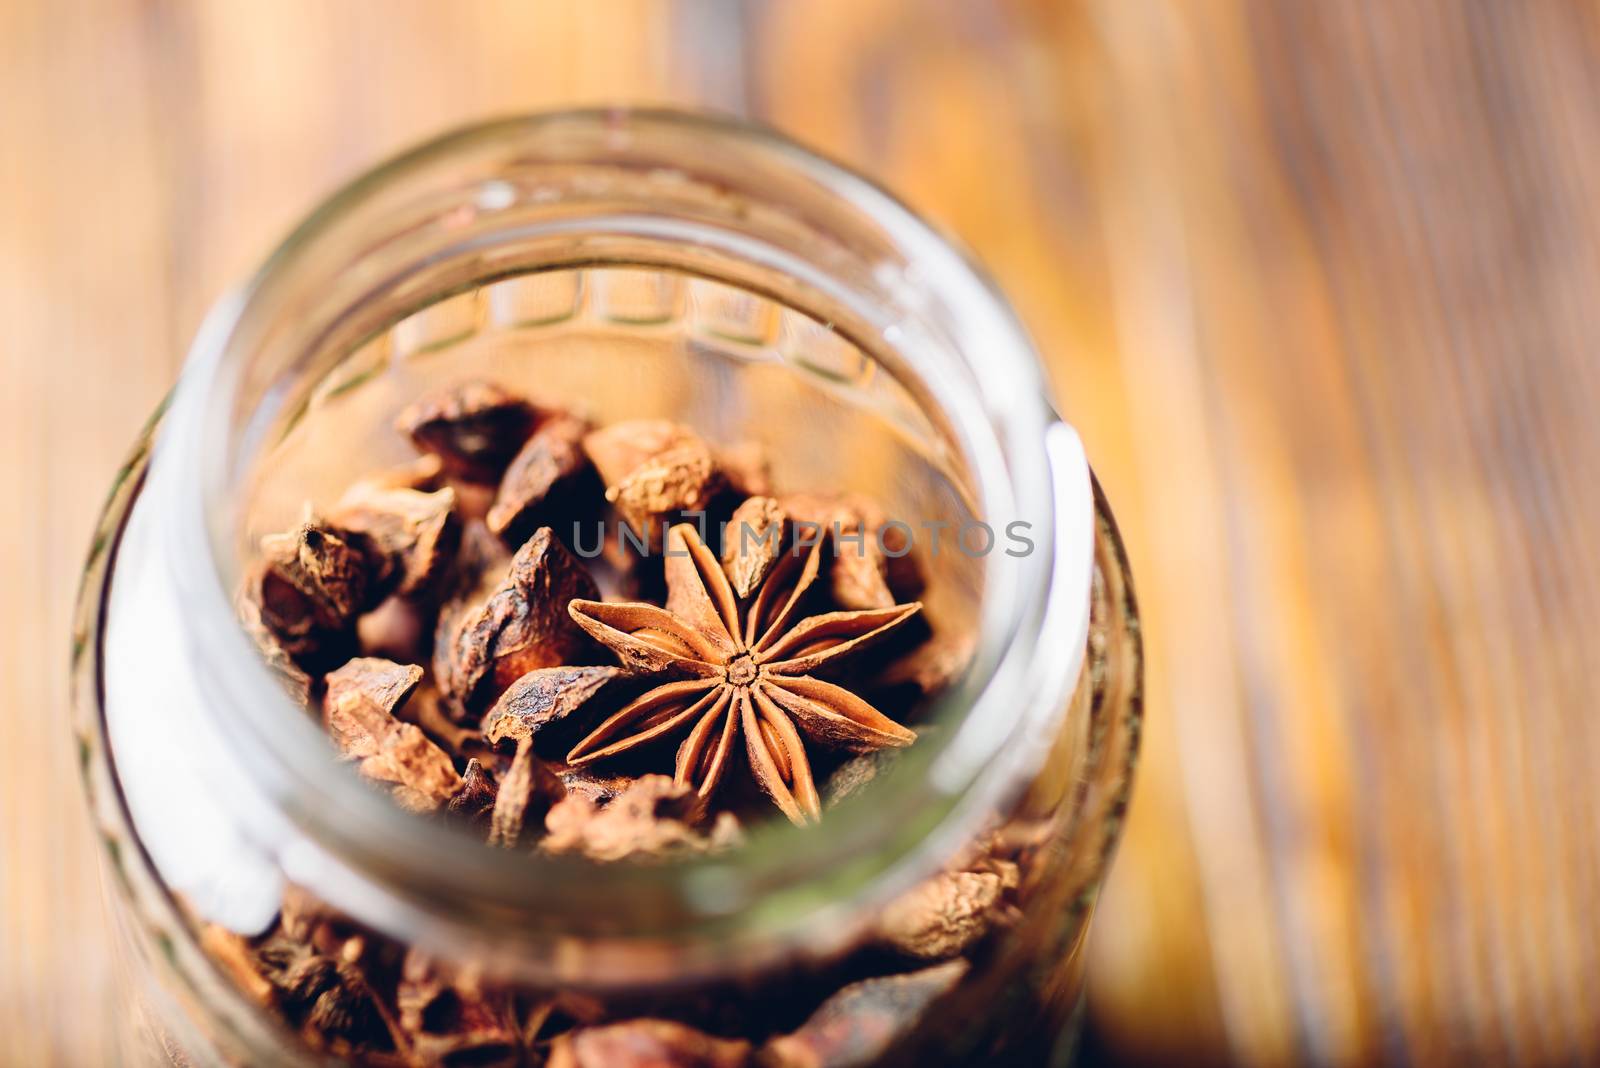 Jar of Star Anise. High Angle View through the Bottleneck.